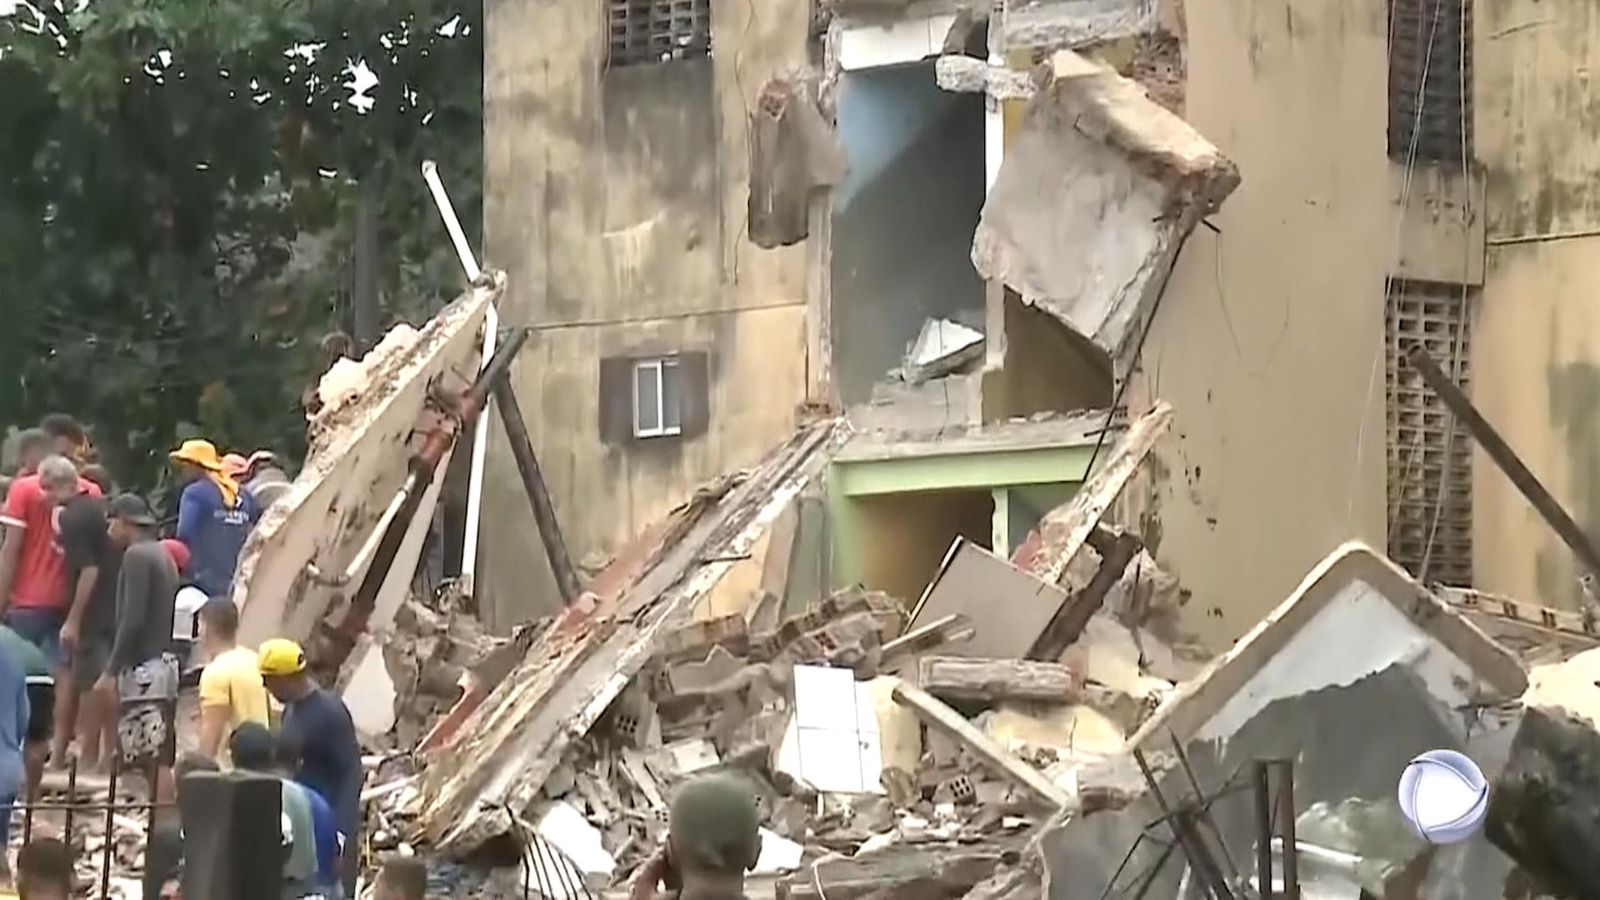 Five dead after 'condemned' building collapses during heavy rain in Brazil